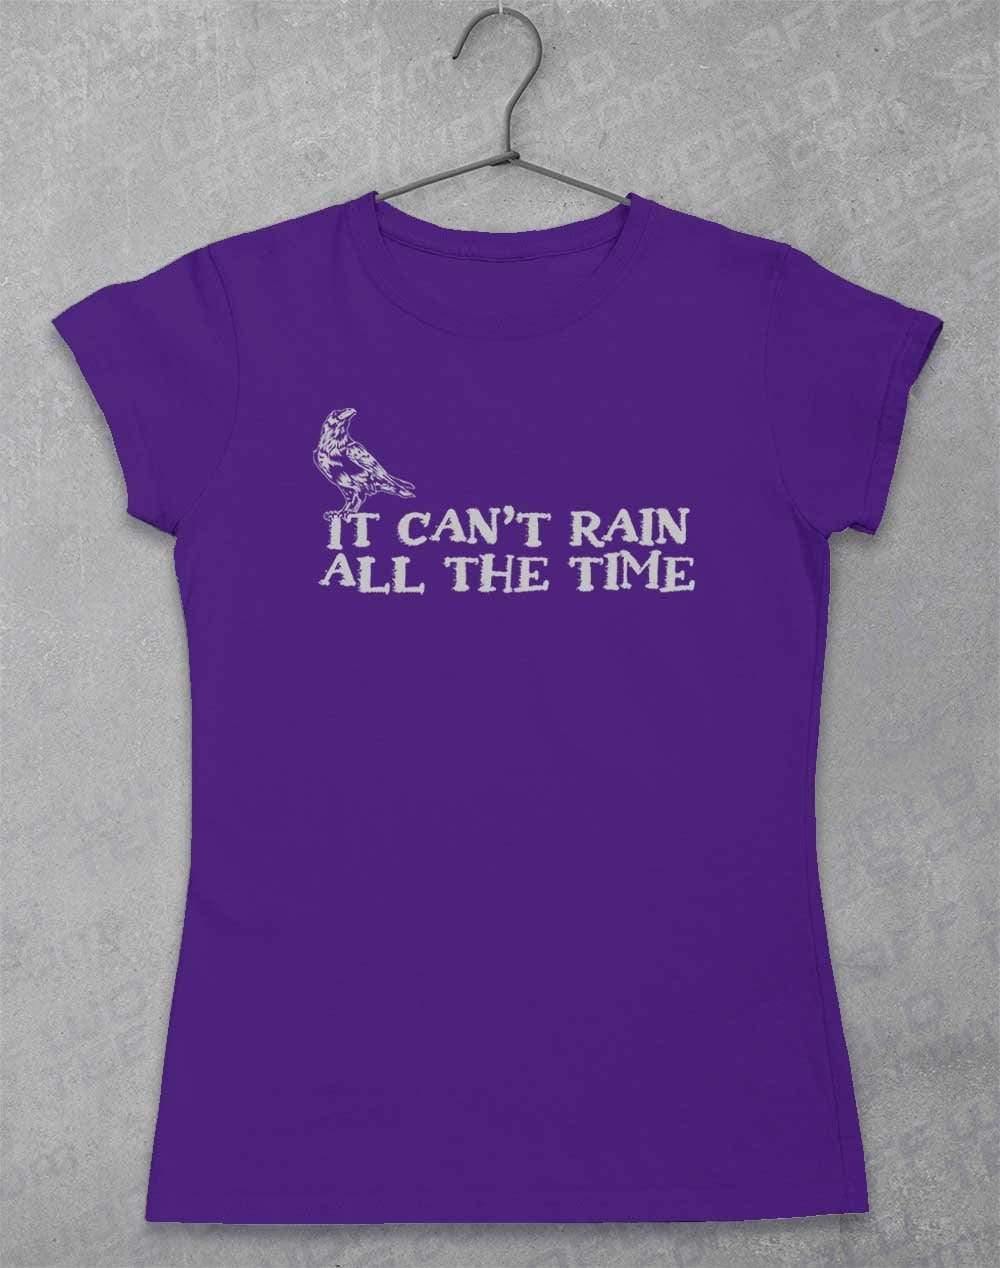 It Can't Rain All the Time Womens T-Shirt 8-10 / Lilac  - Off World Tees